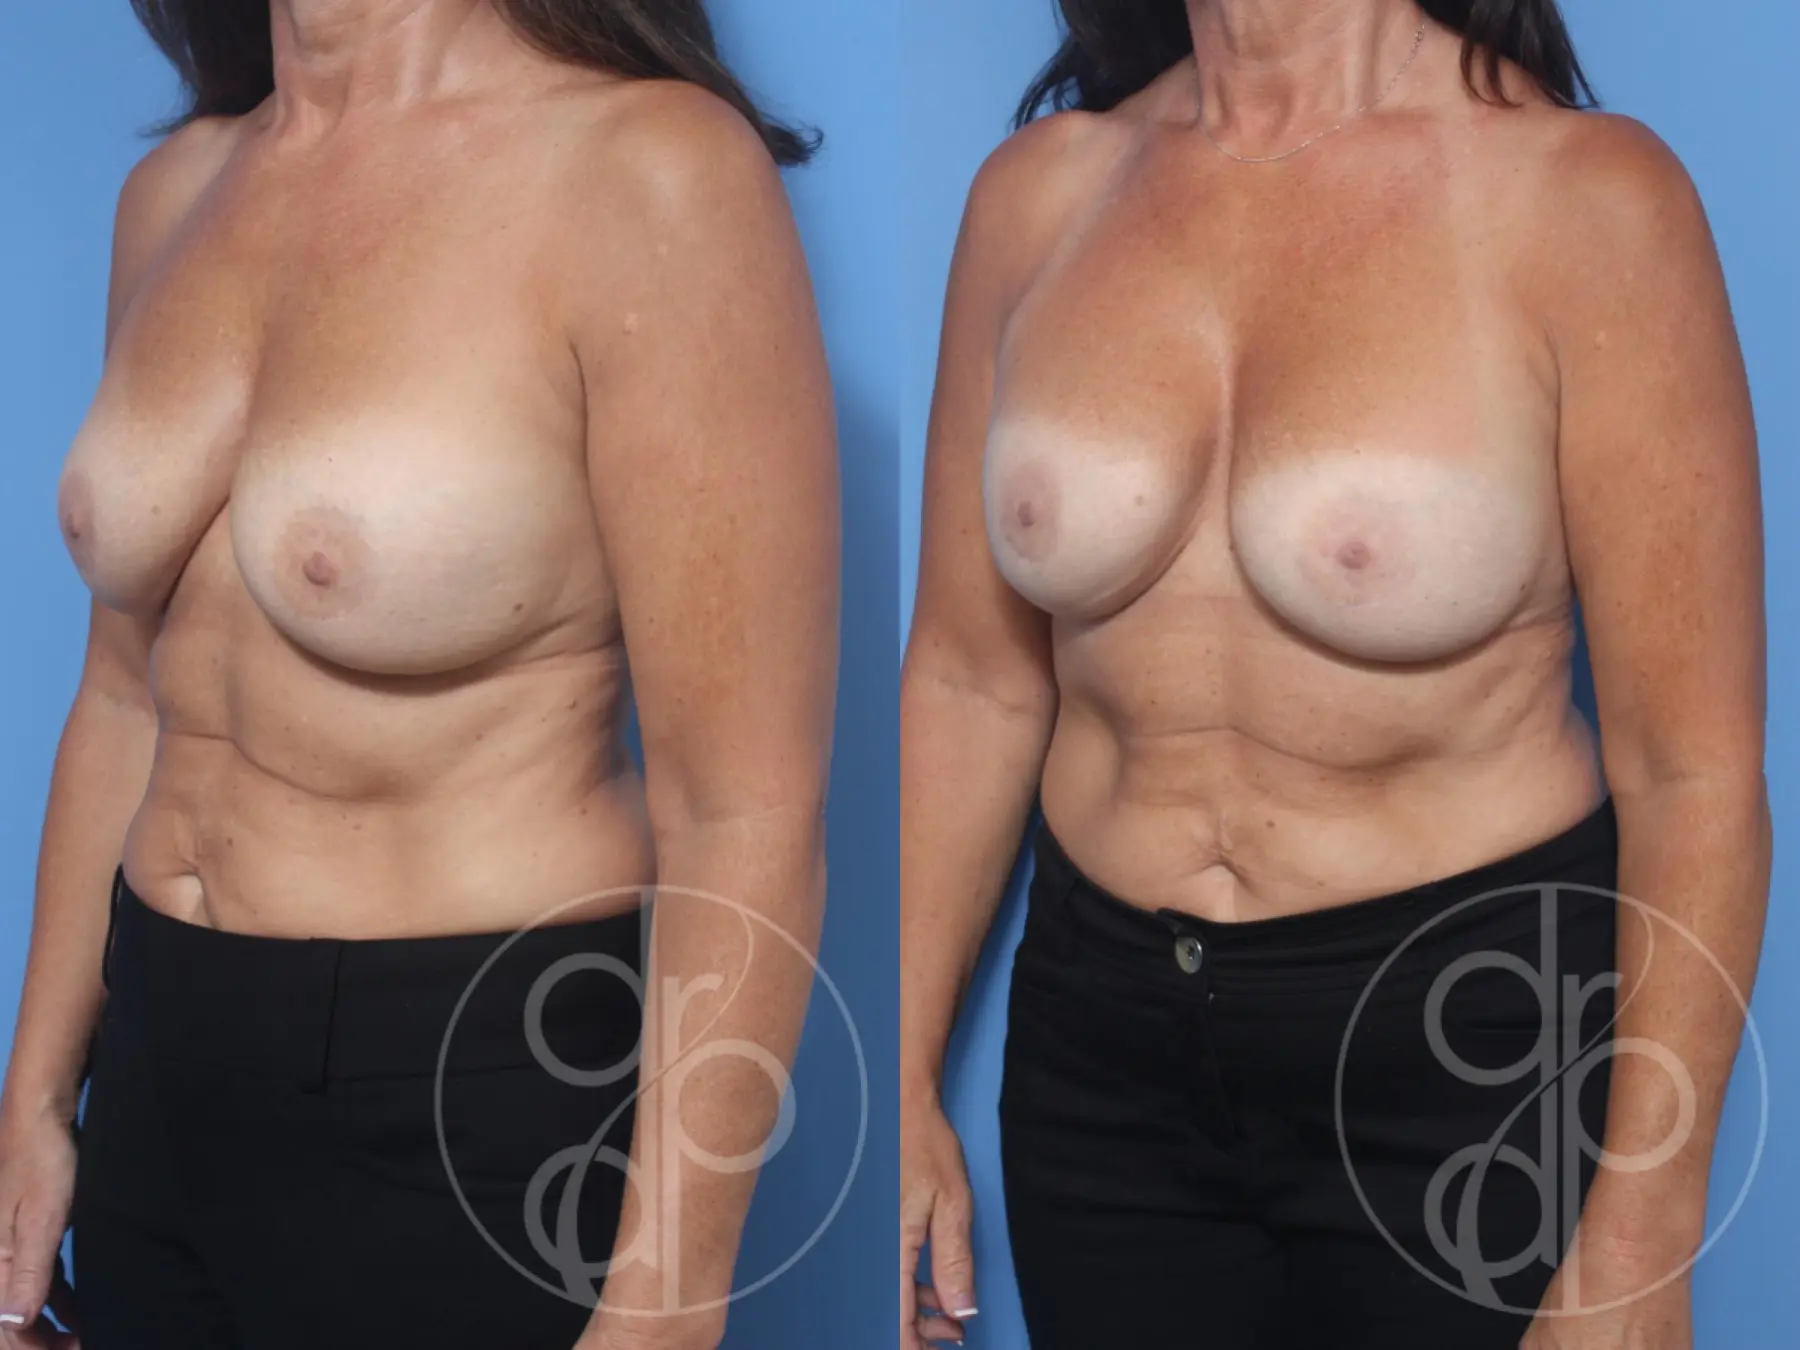 patient 11904 remove and replace breast implants before and after result - Before and After 3